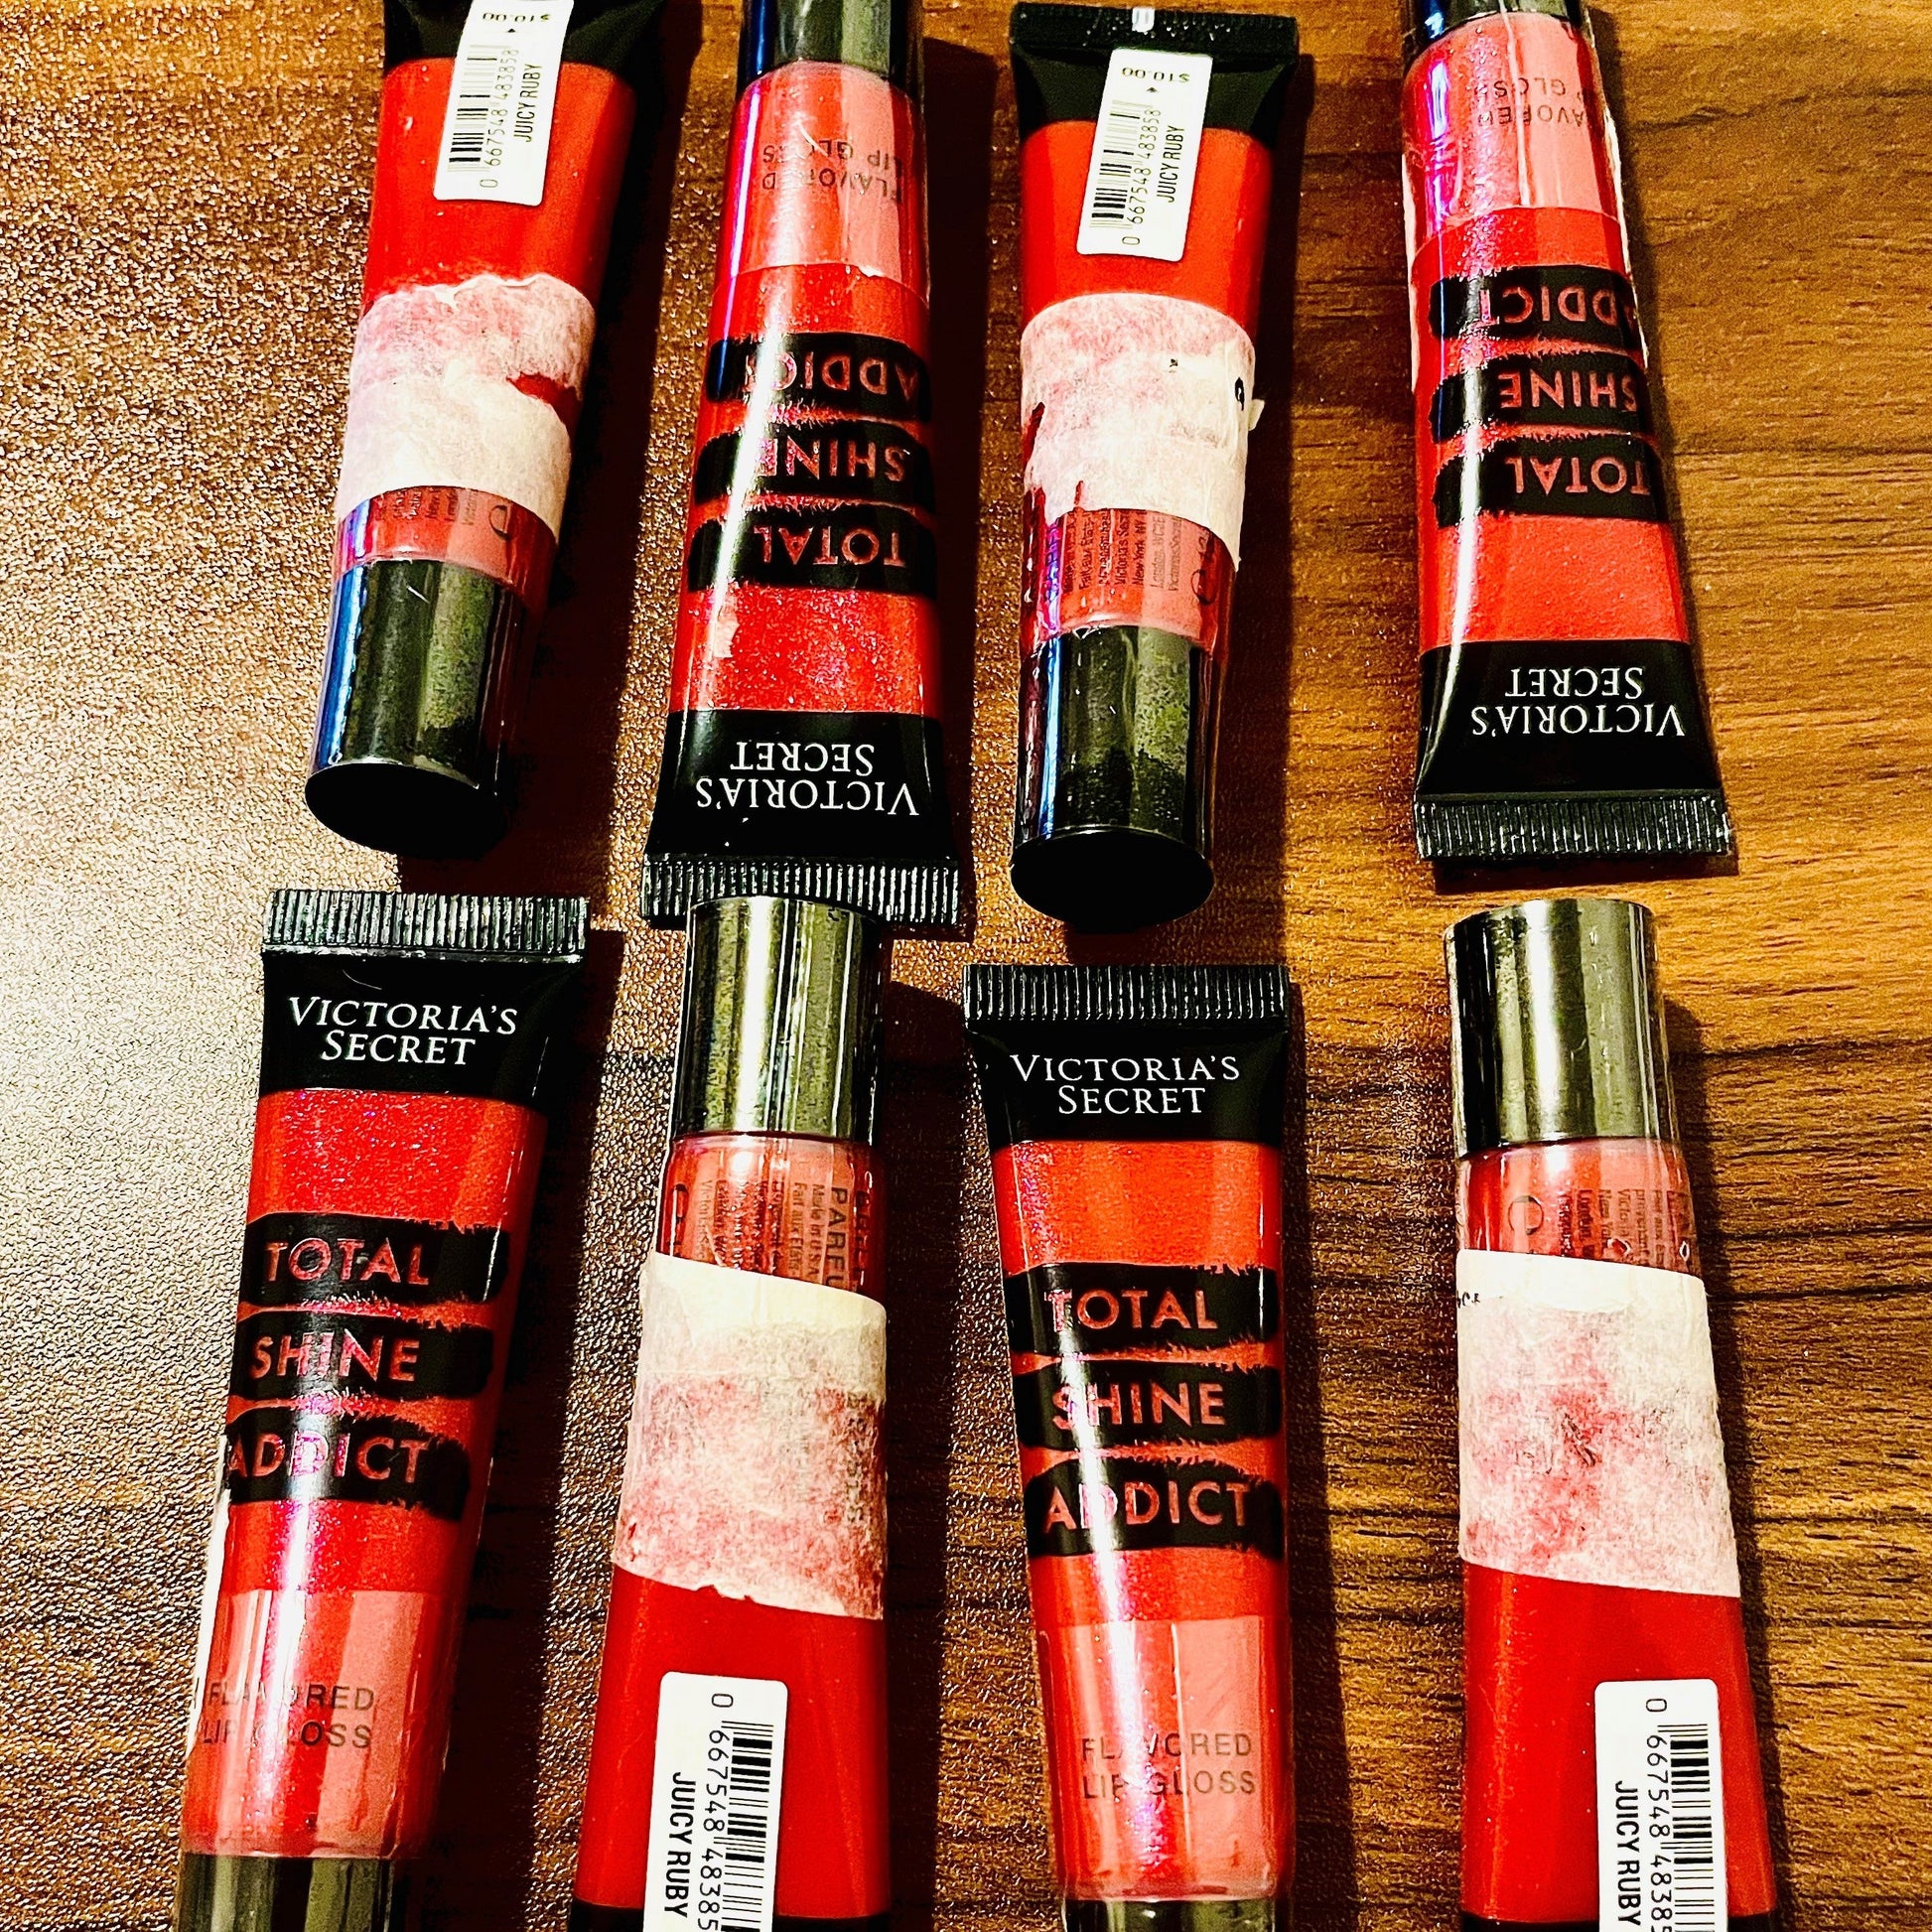 This photo shows 8 victoria secret total shine addict lip glosses with some sale sticker residue on the items as these products were marked down in price due to being unable to remove some sale stickers without damaging the safety seal so we opted to sell the items discounted with the stickers to keep the safety seal in tact.on all the products. & marked the products down drastically. all products are brand new unused with minor cosmetic imperfections on outer packaging